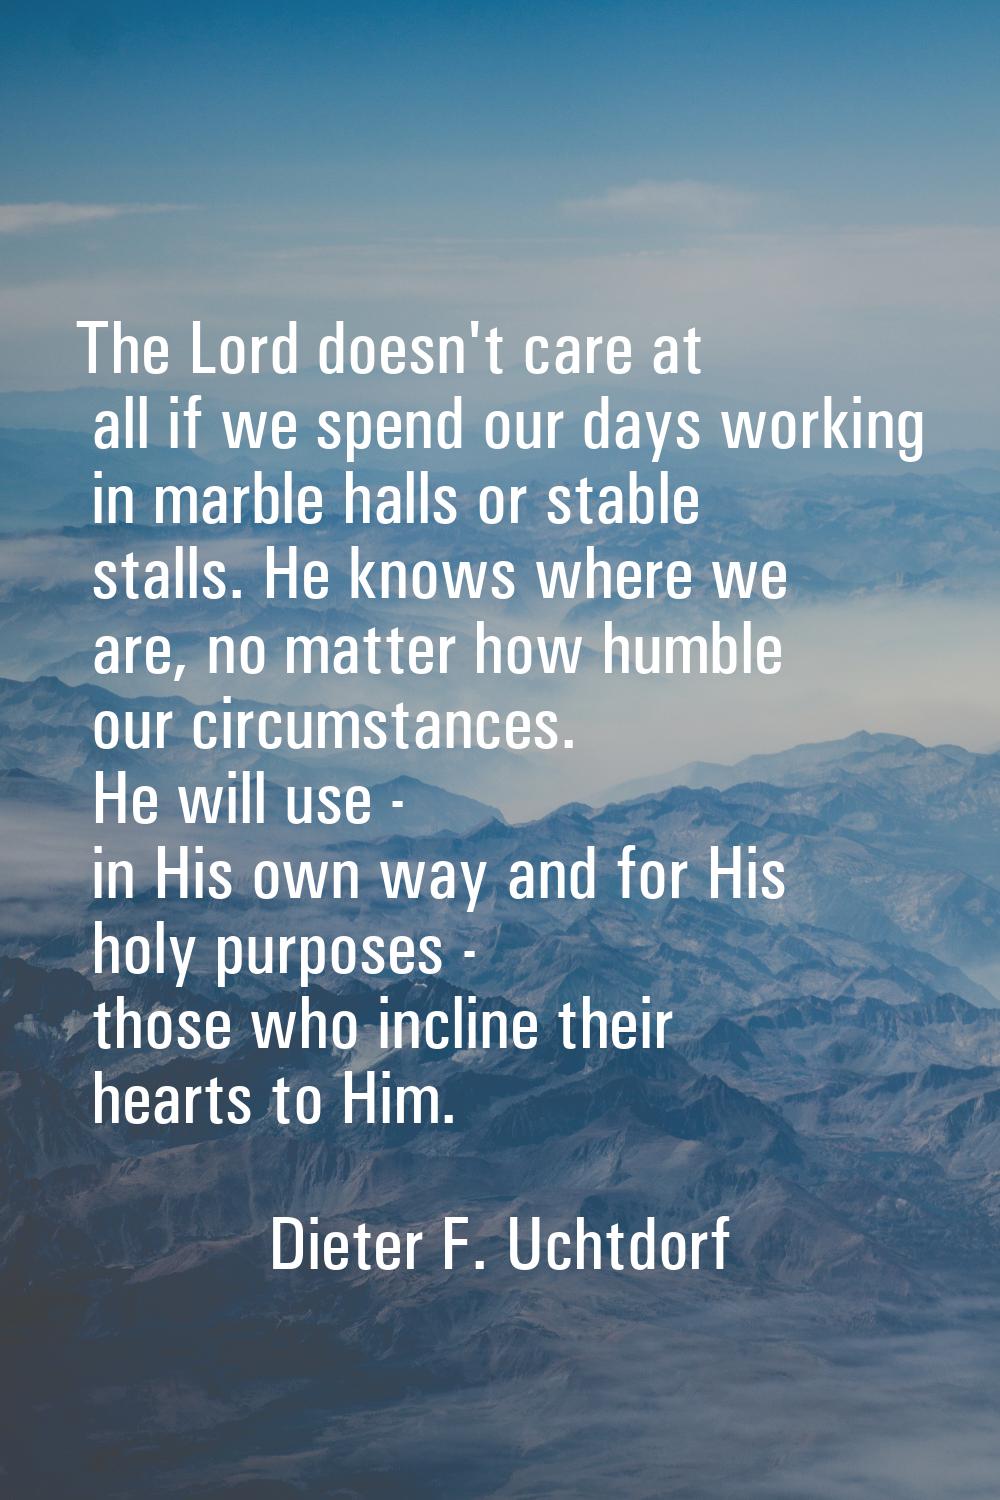 The Lord doesn't care at all if we spend our days working in marble halls or stable stalls. He know